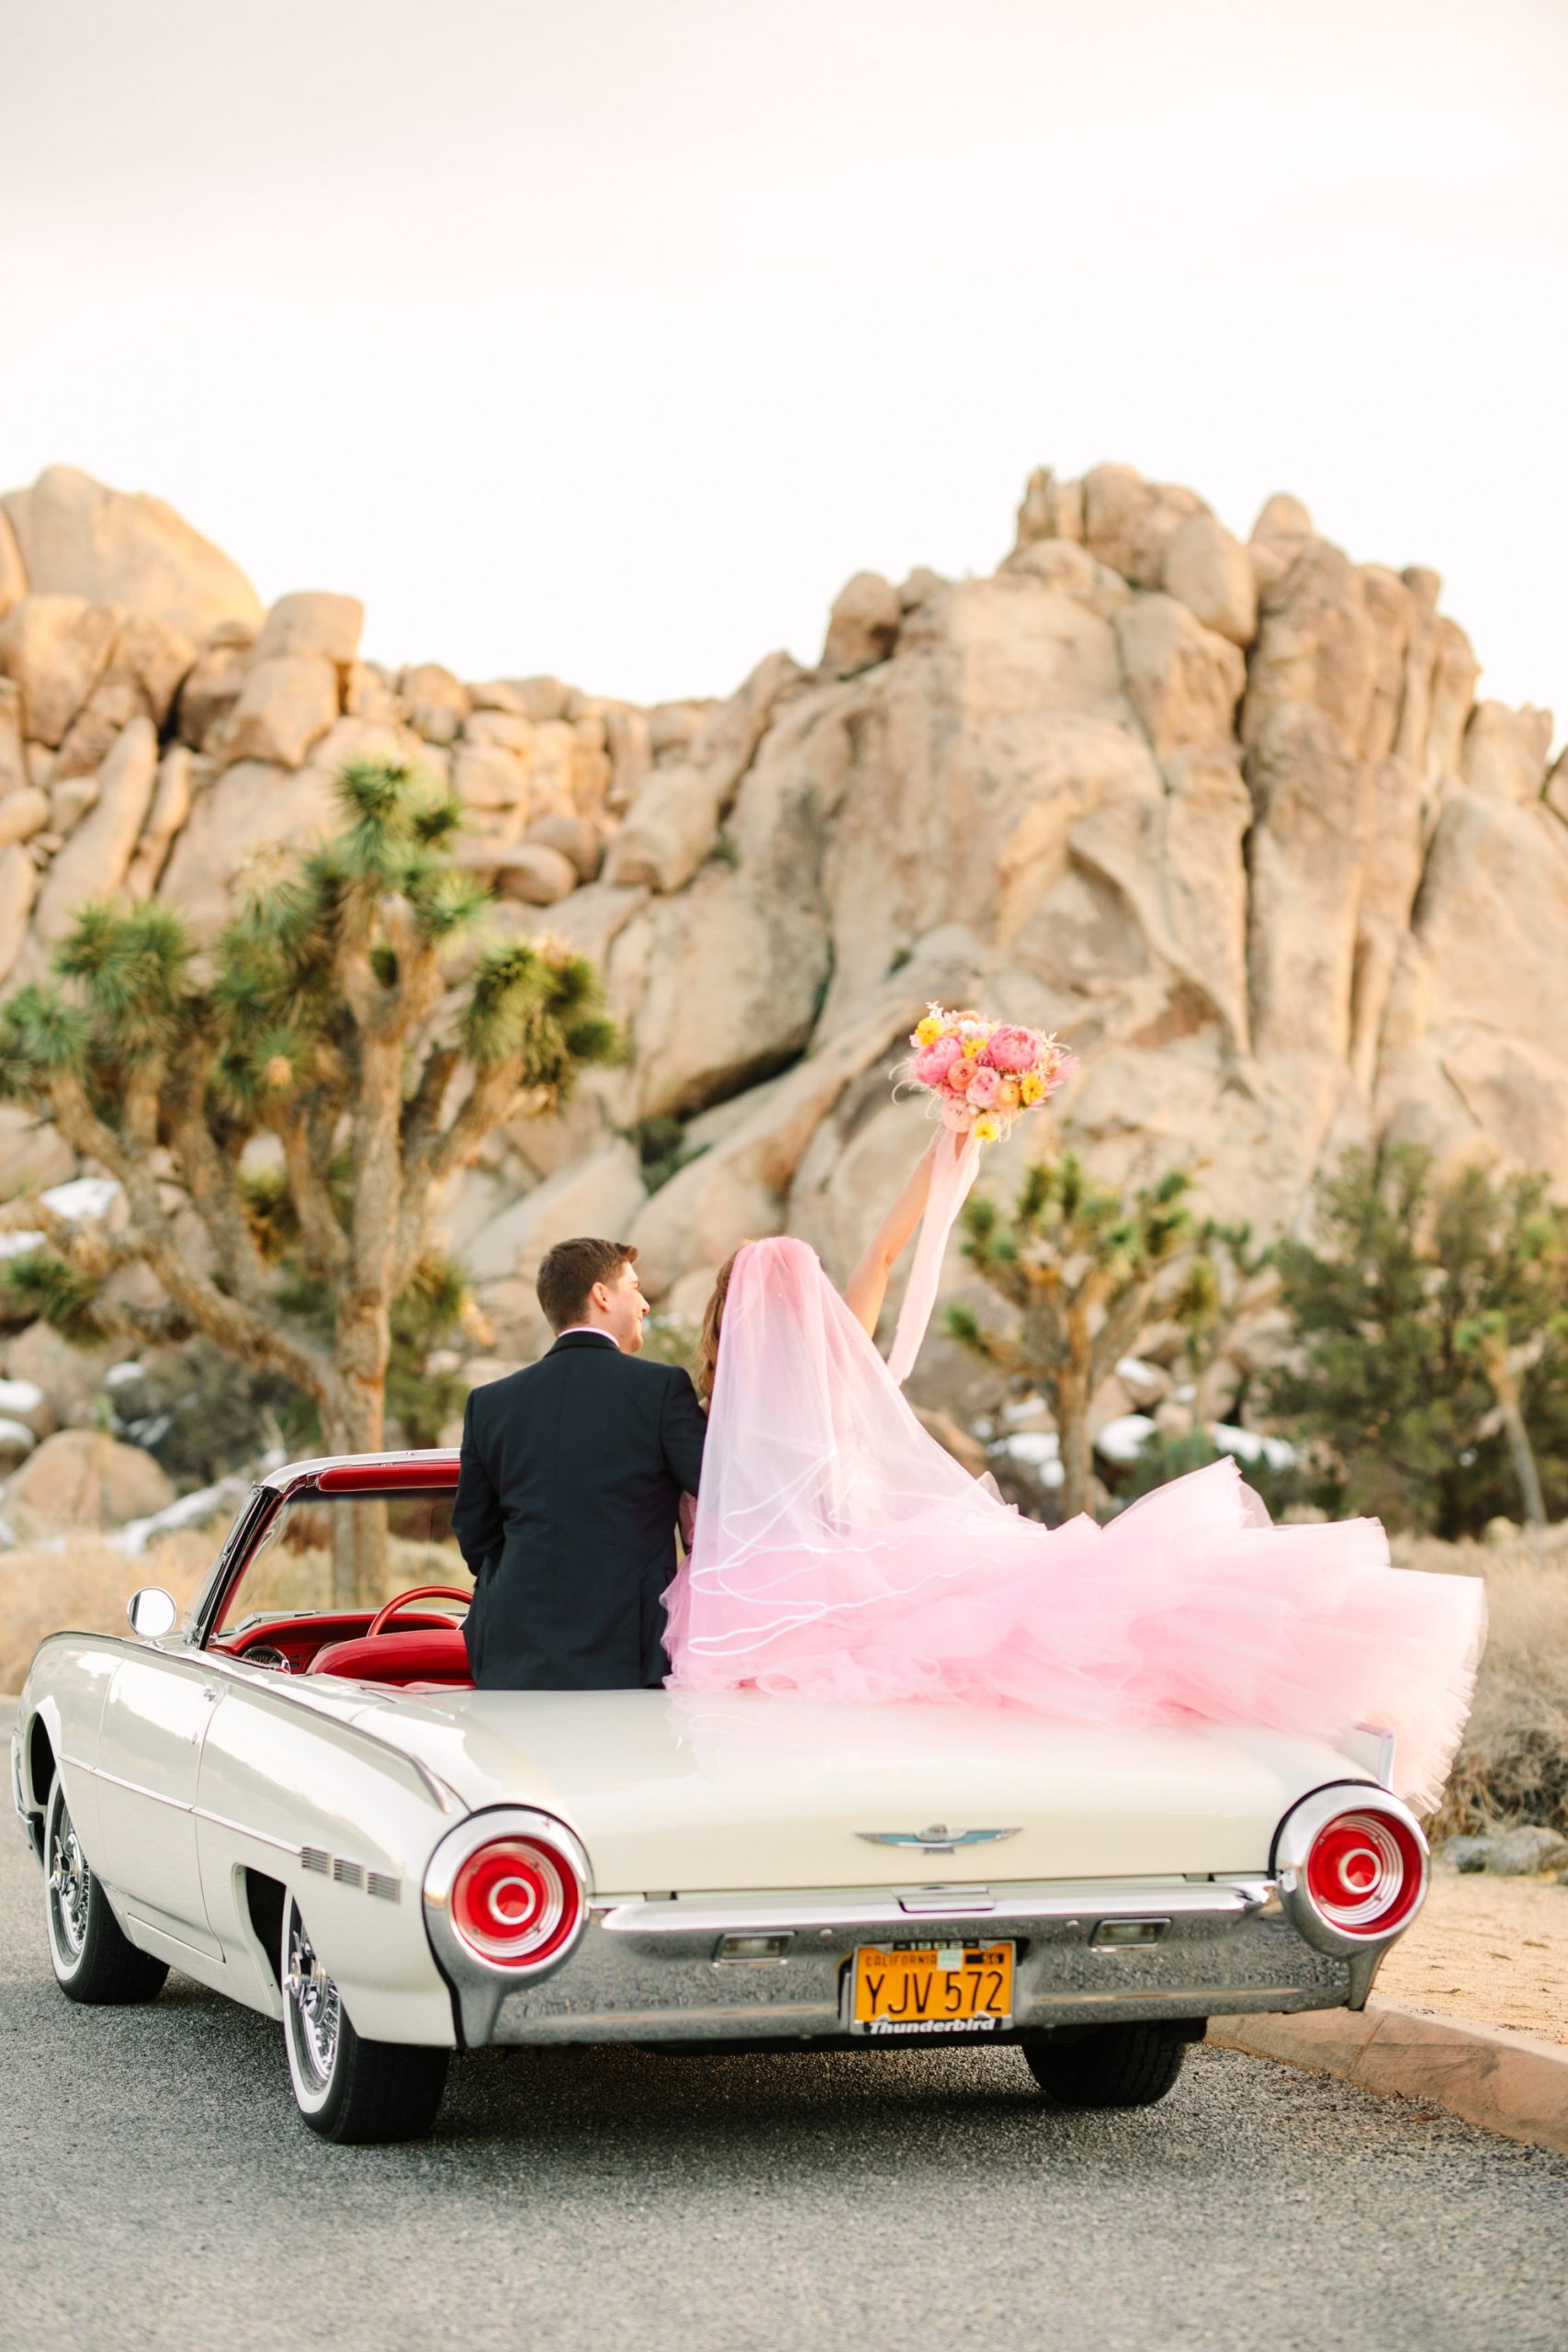 Bride and groom in white classic Ford Thunderbird convertible | Pink wedding dress Joshua Tree elopement featured on Green Wedding Shoes | Colorful desert wedding inspiration for fun-loving couples in Southern California #joshuatreewedding #joshuatreeelopement #pinkwedding #greenweddingshoes Source: Mary Costa Photography | Los Angeles